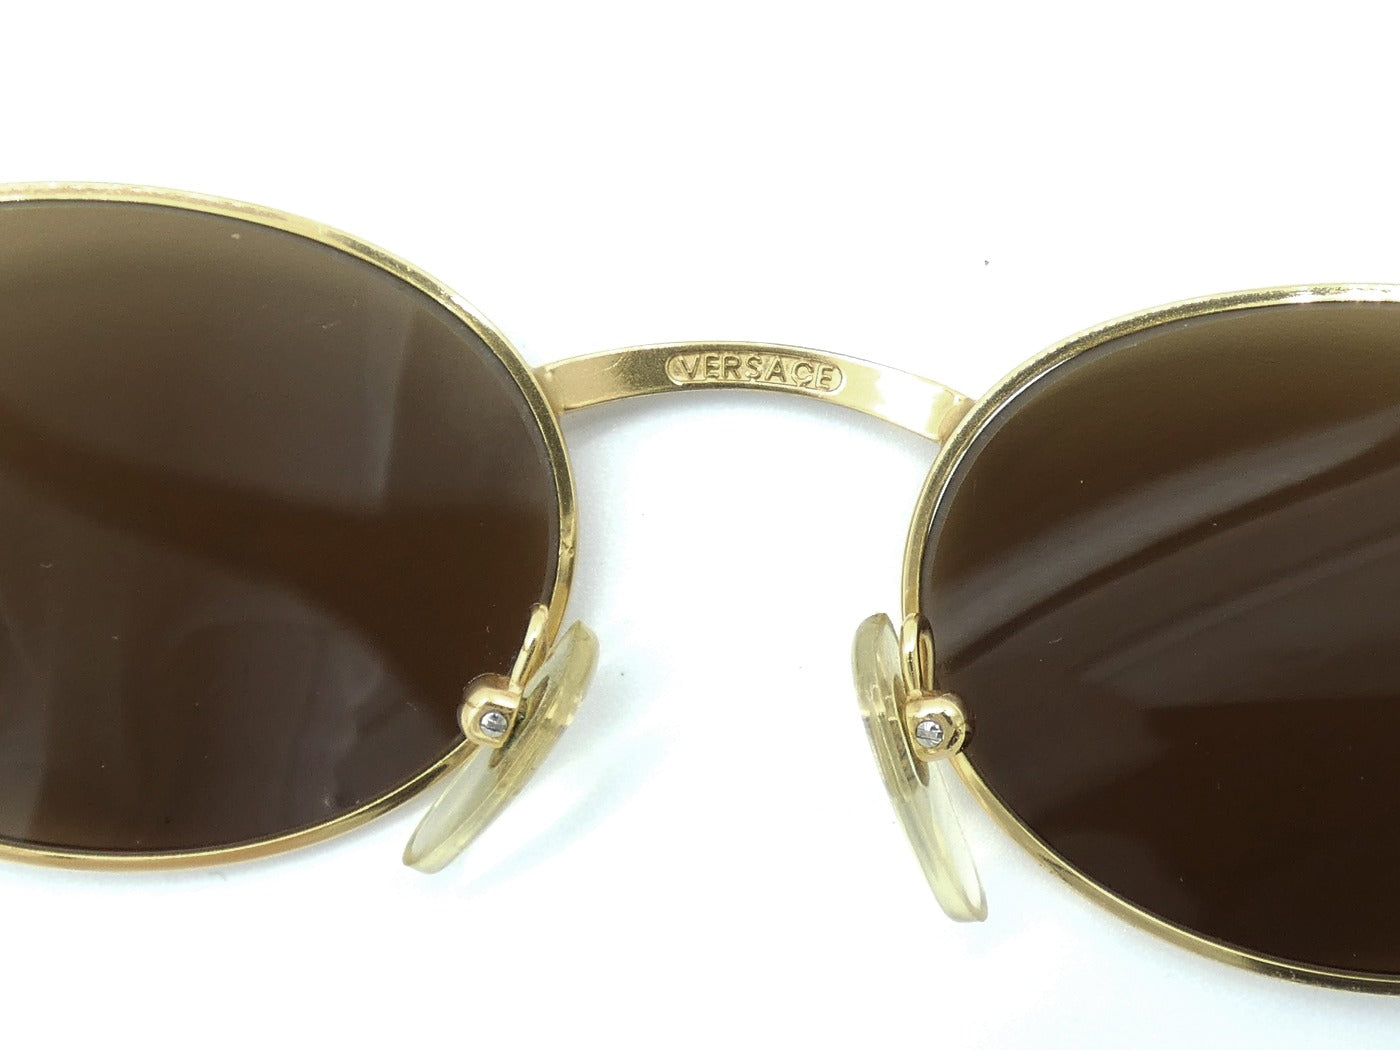 Gianni Versace Vintage Oval Sunglasses with Greek Key Arms Sunglasses Gianni Versace